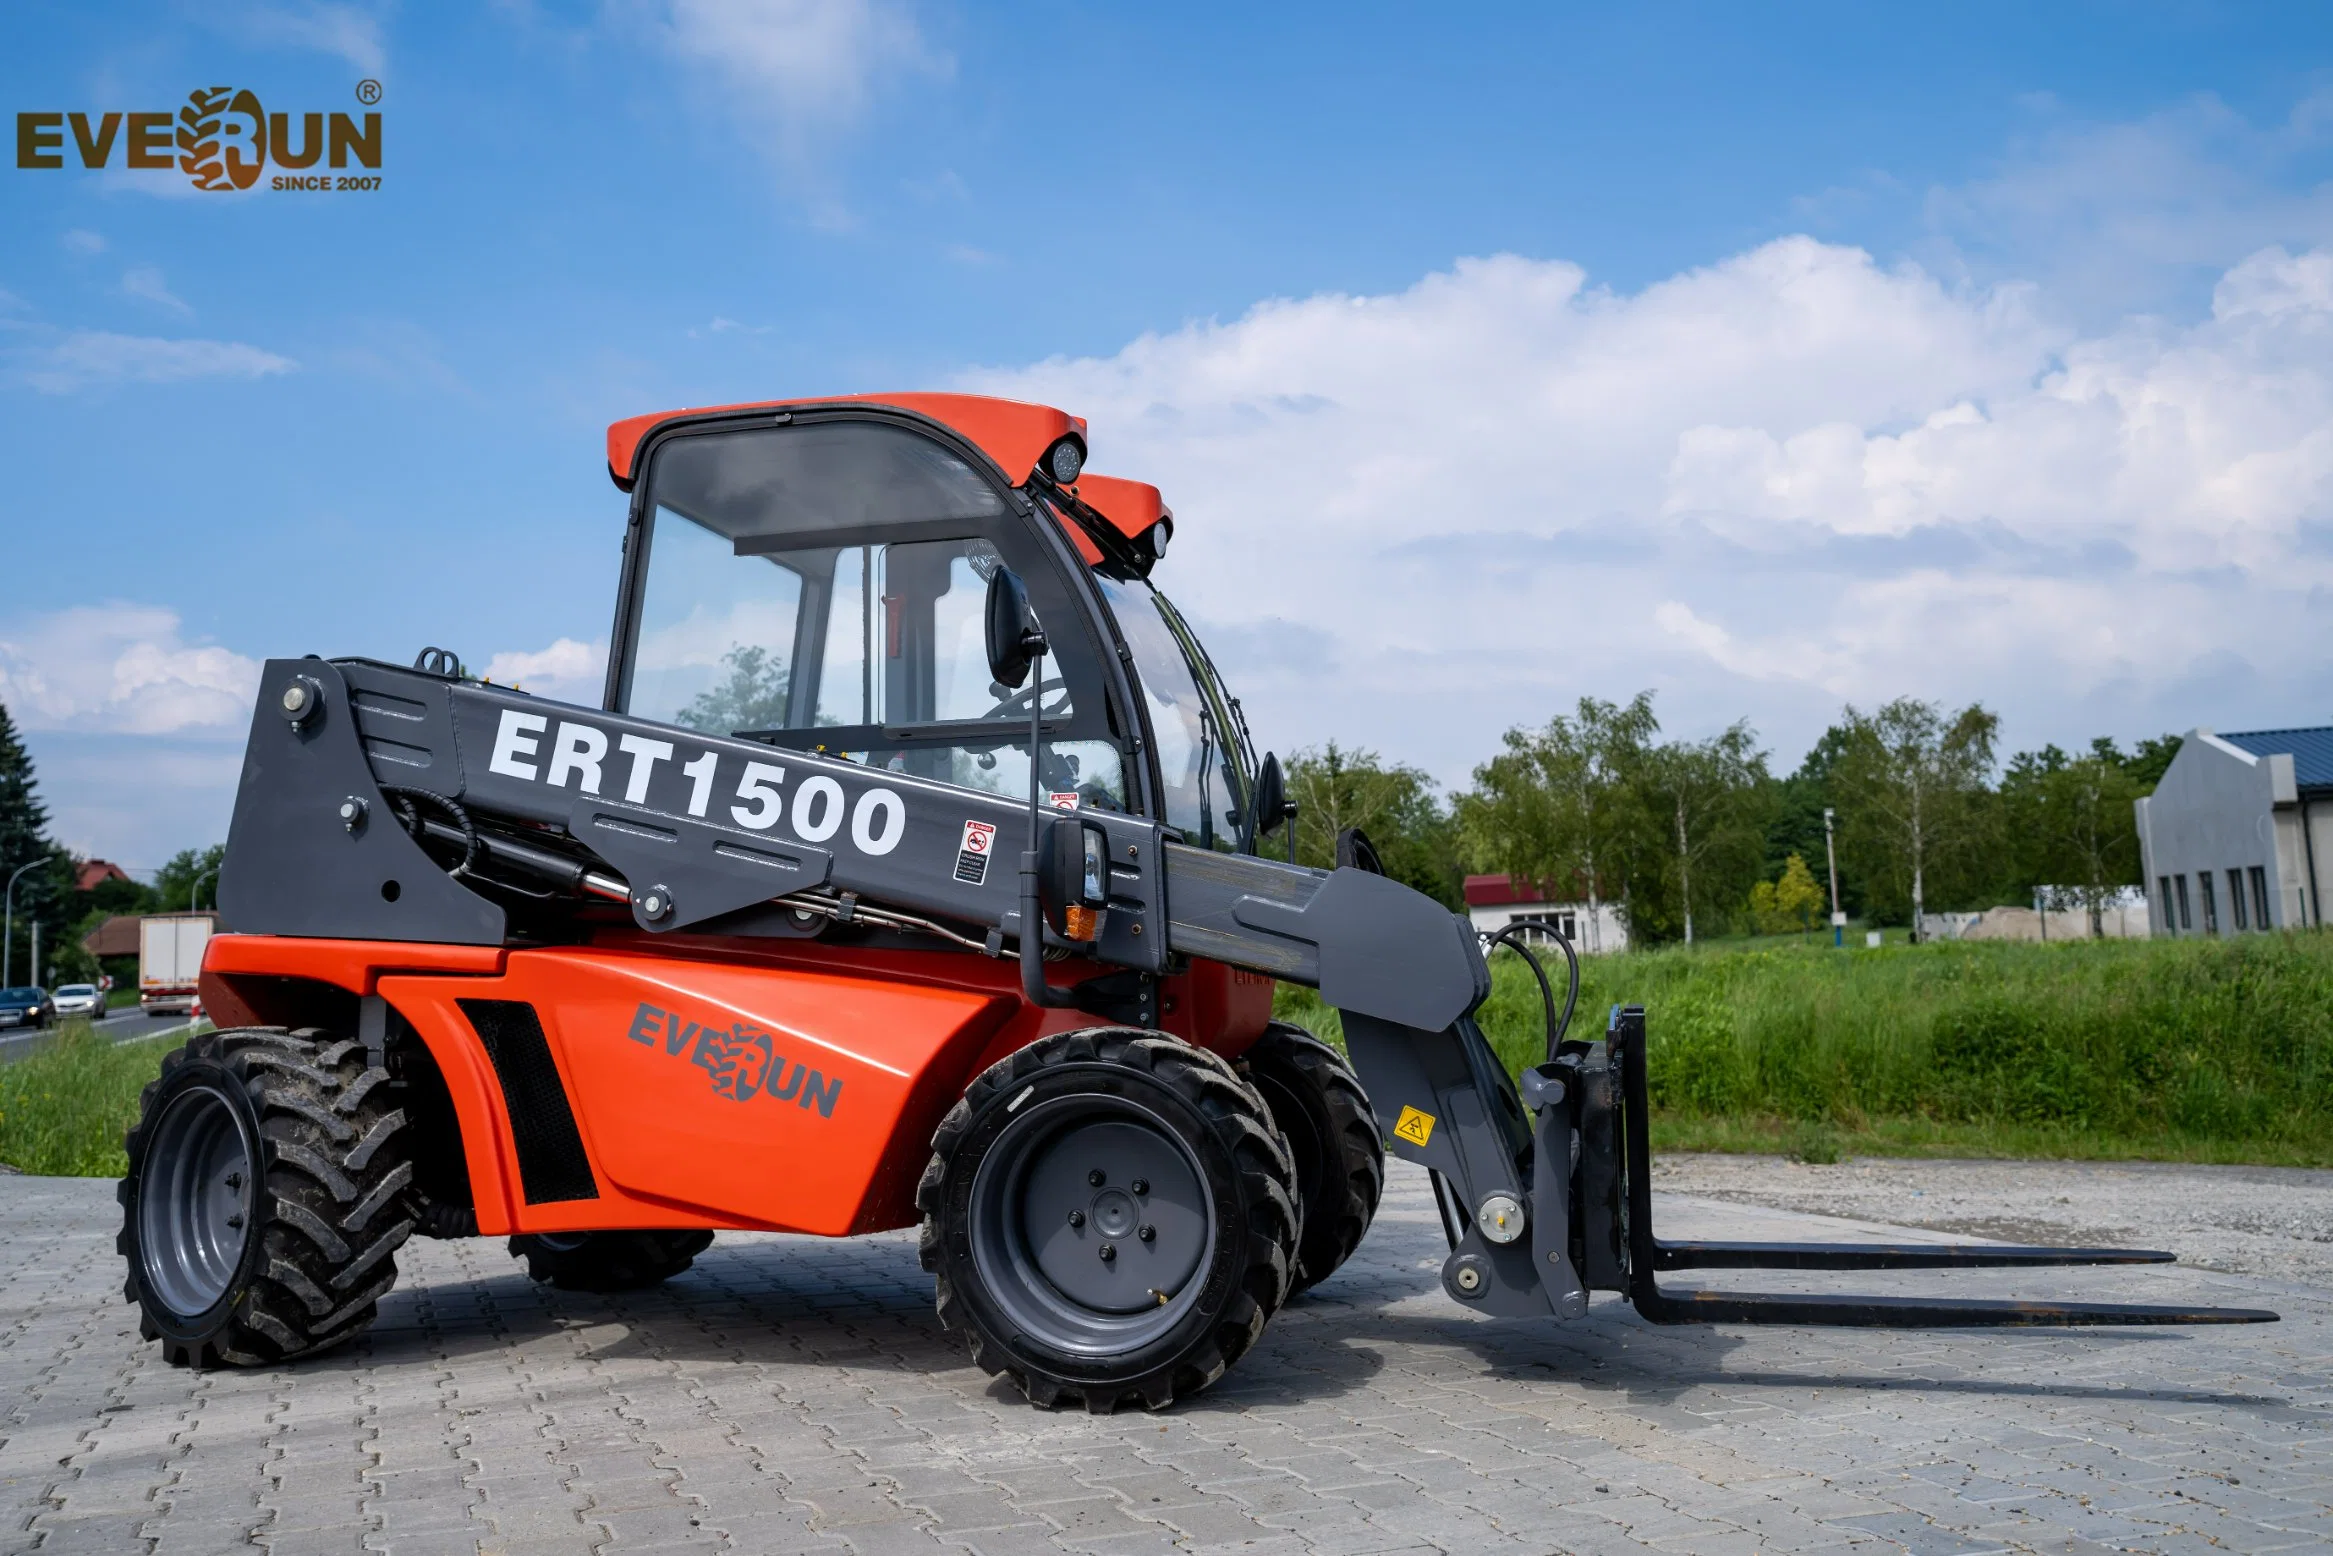 Factory Price Everun Ert1500 Construction Machinery Equipment 4 Wheel Drive with Mini Front End Telescopic Mini Telescopic Wheel Loader for Sale